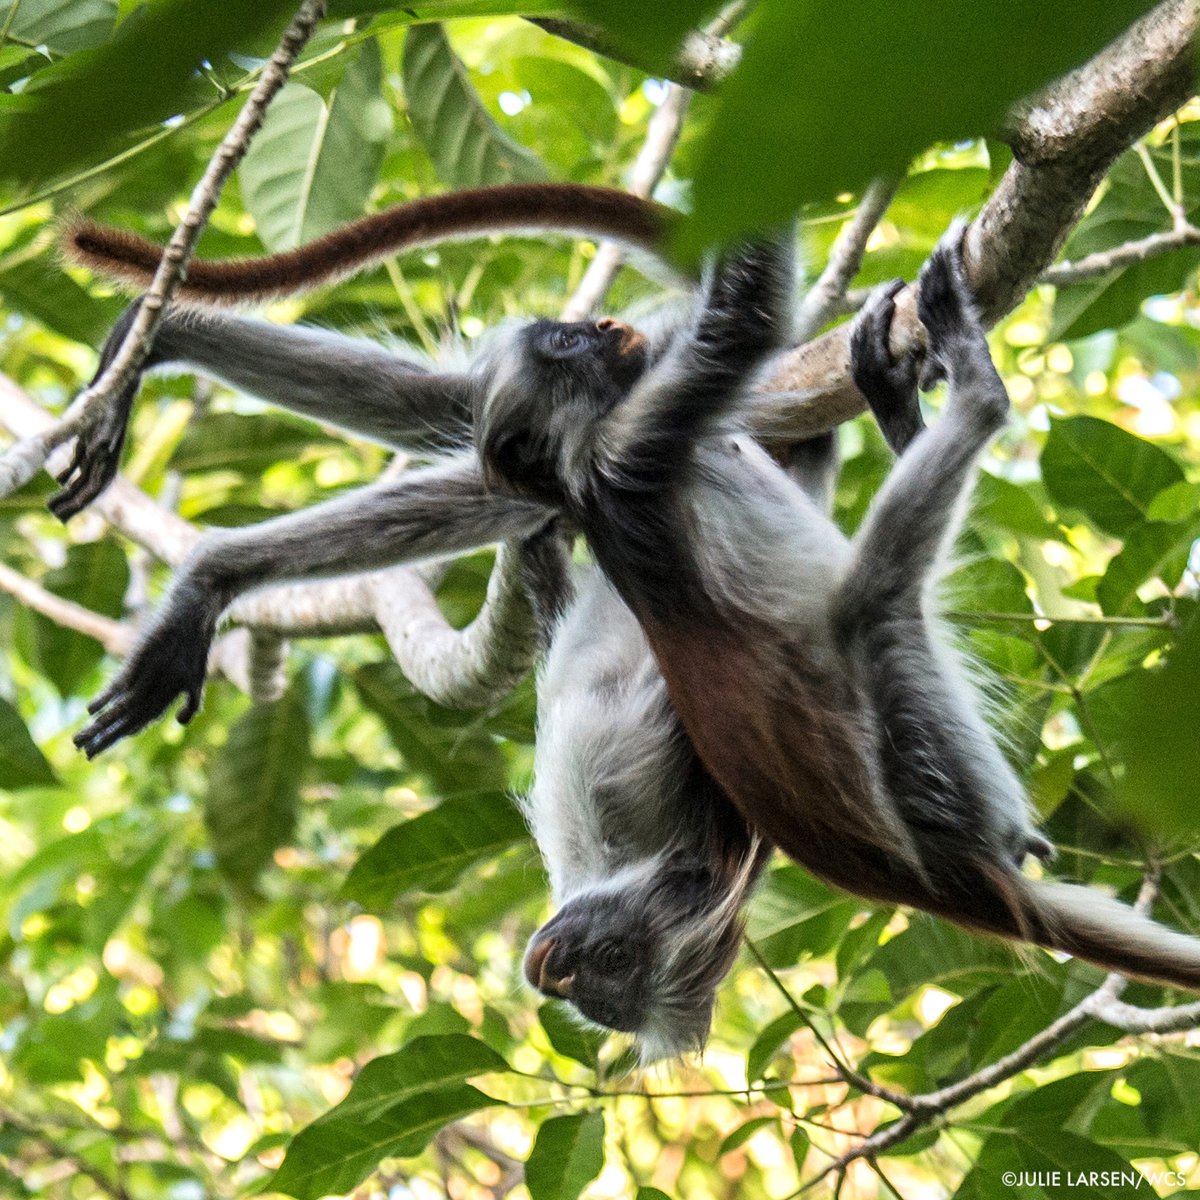 Some key stories from last week: ▶️ 150,000 acres protected in Argentina: bit.ly/3UnFs5E ▶️ Saving a group of monkeys could help Africa’s tropical forests: bit.ly/3woMj6T ▶️ Opinion: pandemic prevention needed #INB9 bit.ly/4a3h4wb